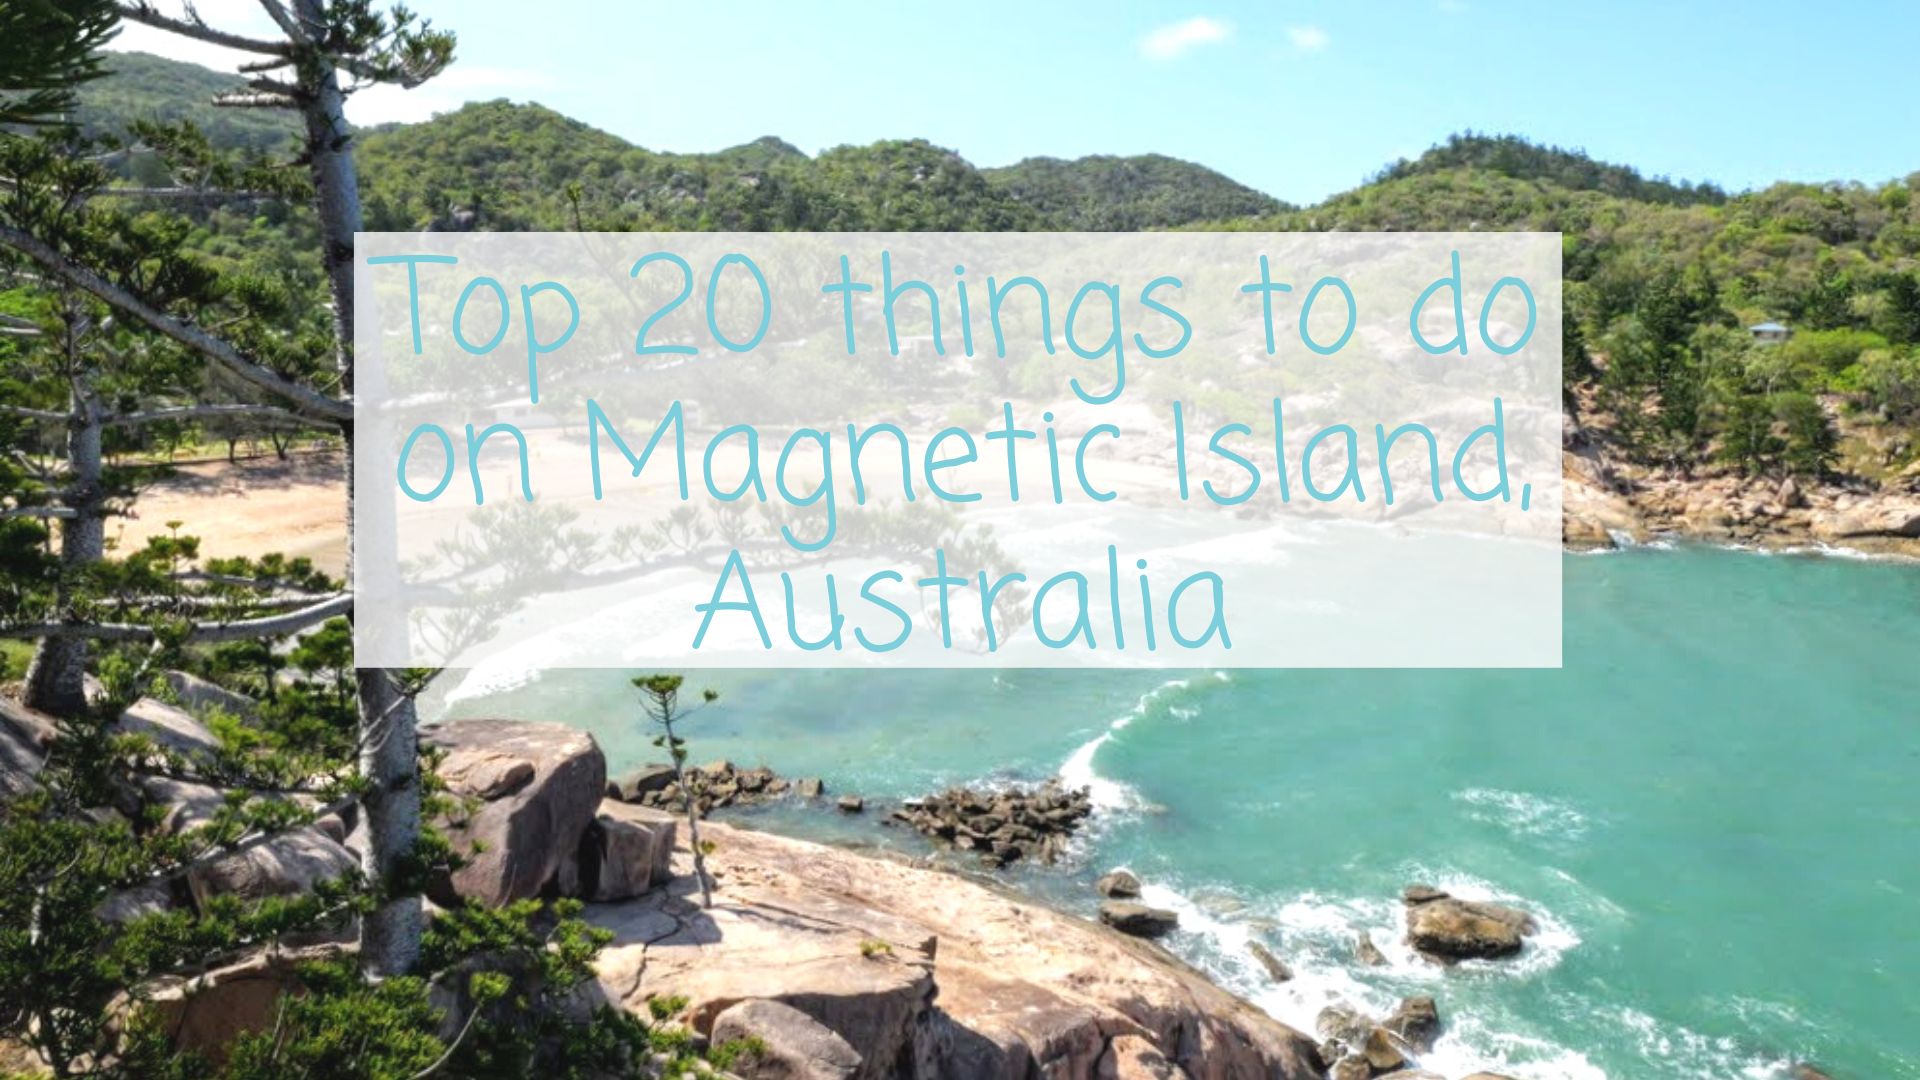 Things to do in Magnetic Island, Queensland. Things to do in Maggie, Townsville Australia, Activities in Magnetic Island, Best things to do on Magnetic Island, Alma bay beach